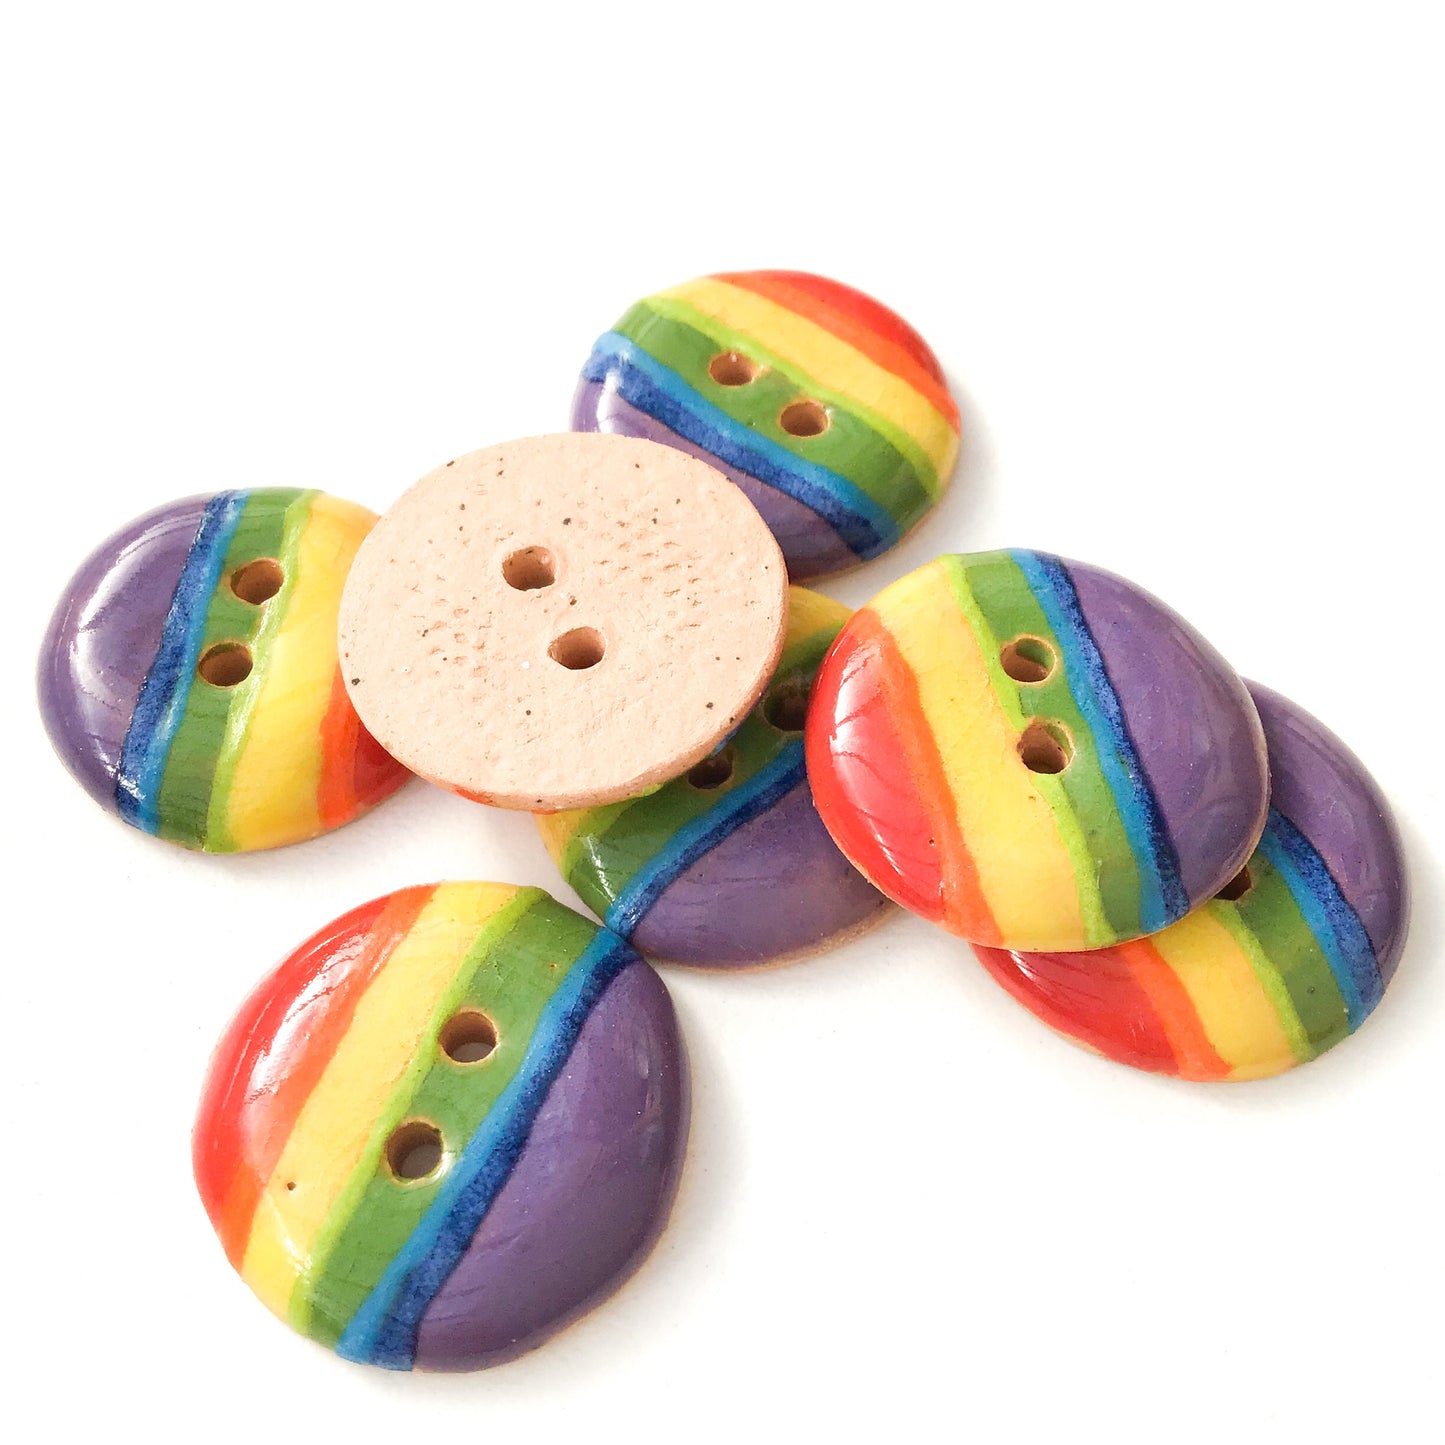 Striped Rainbow Buttons - Ceramic Rainbow Buttons - 3/4" - 7 Pack